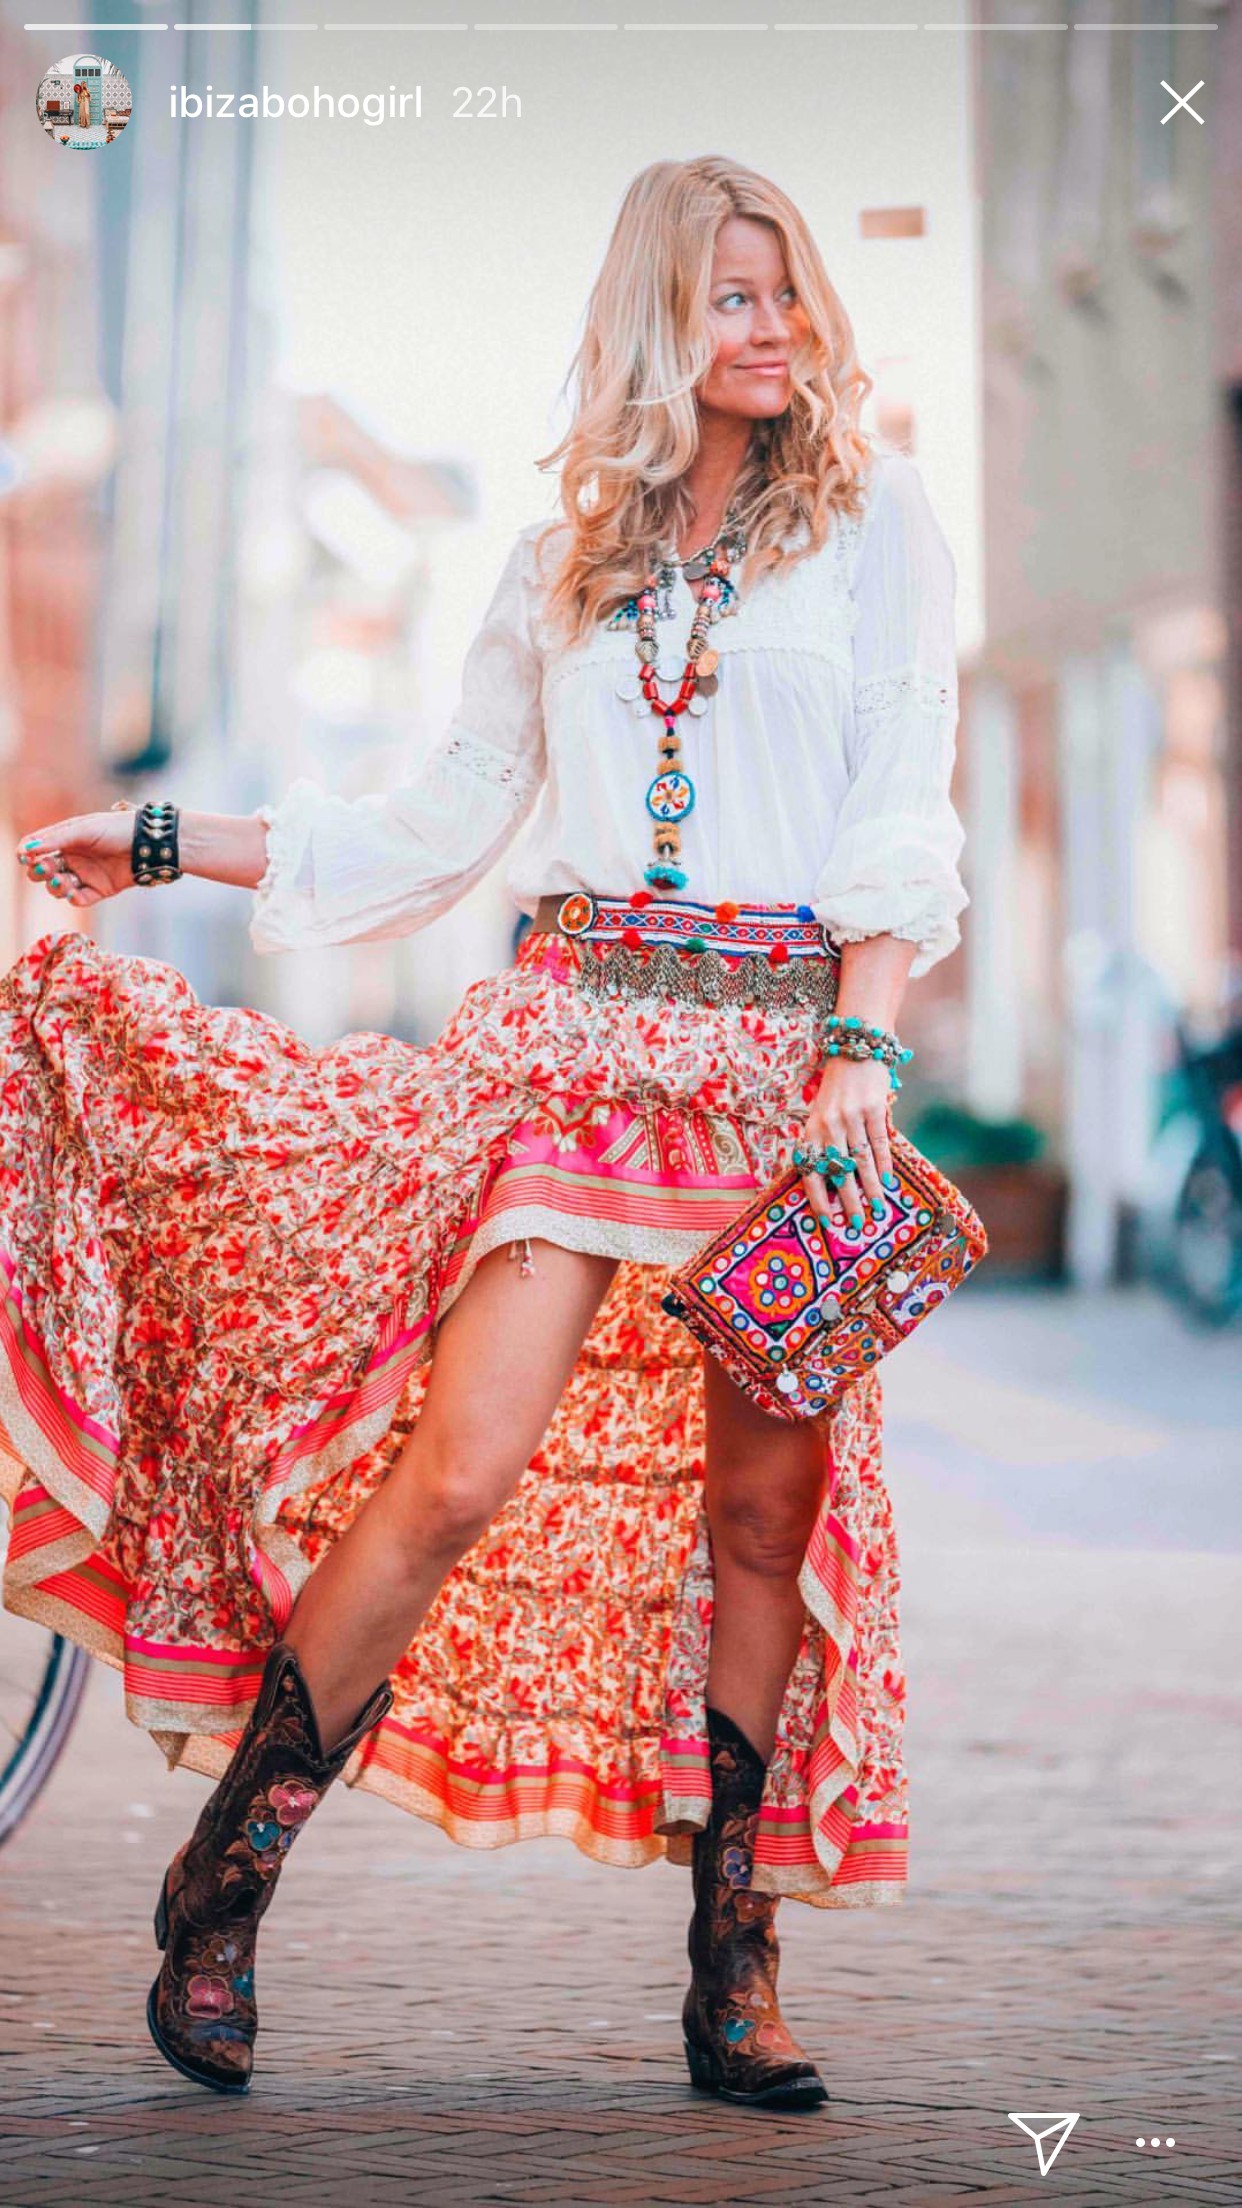 bohemian attire with boots